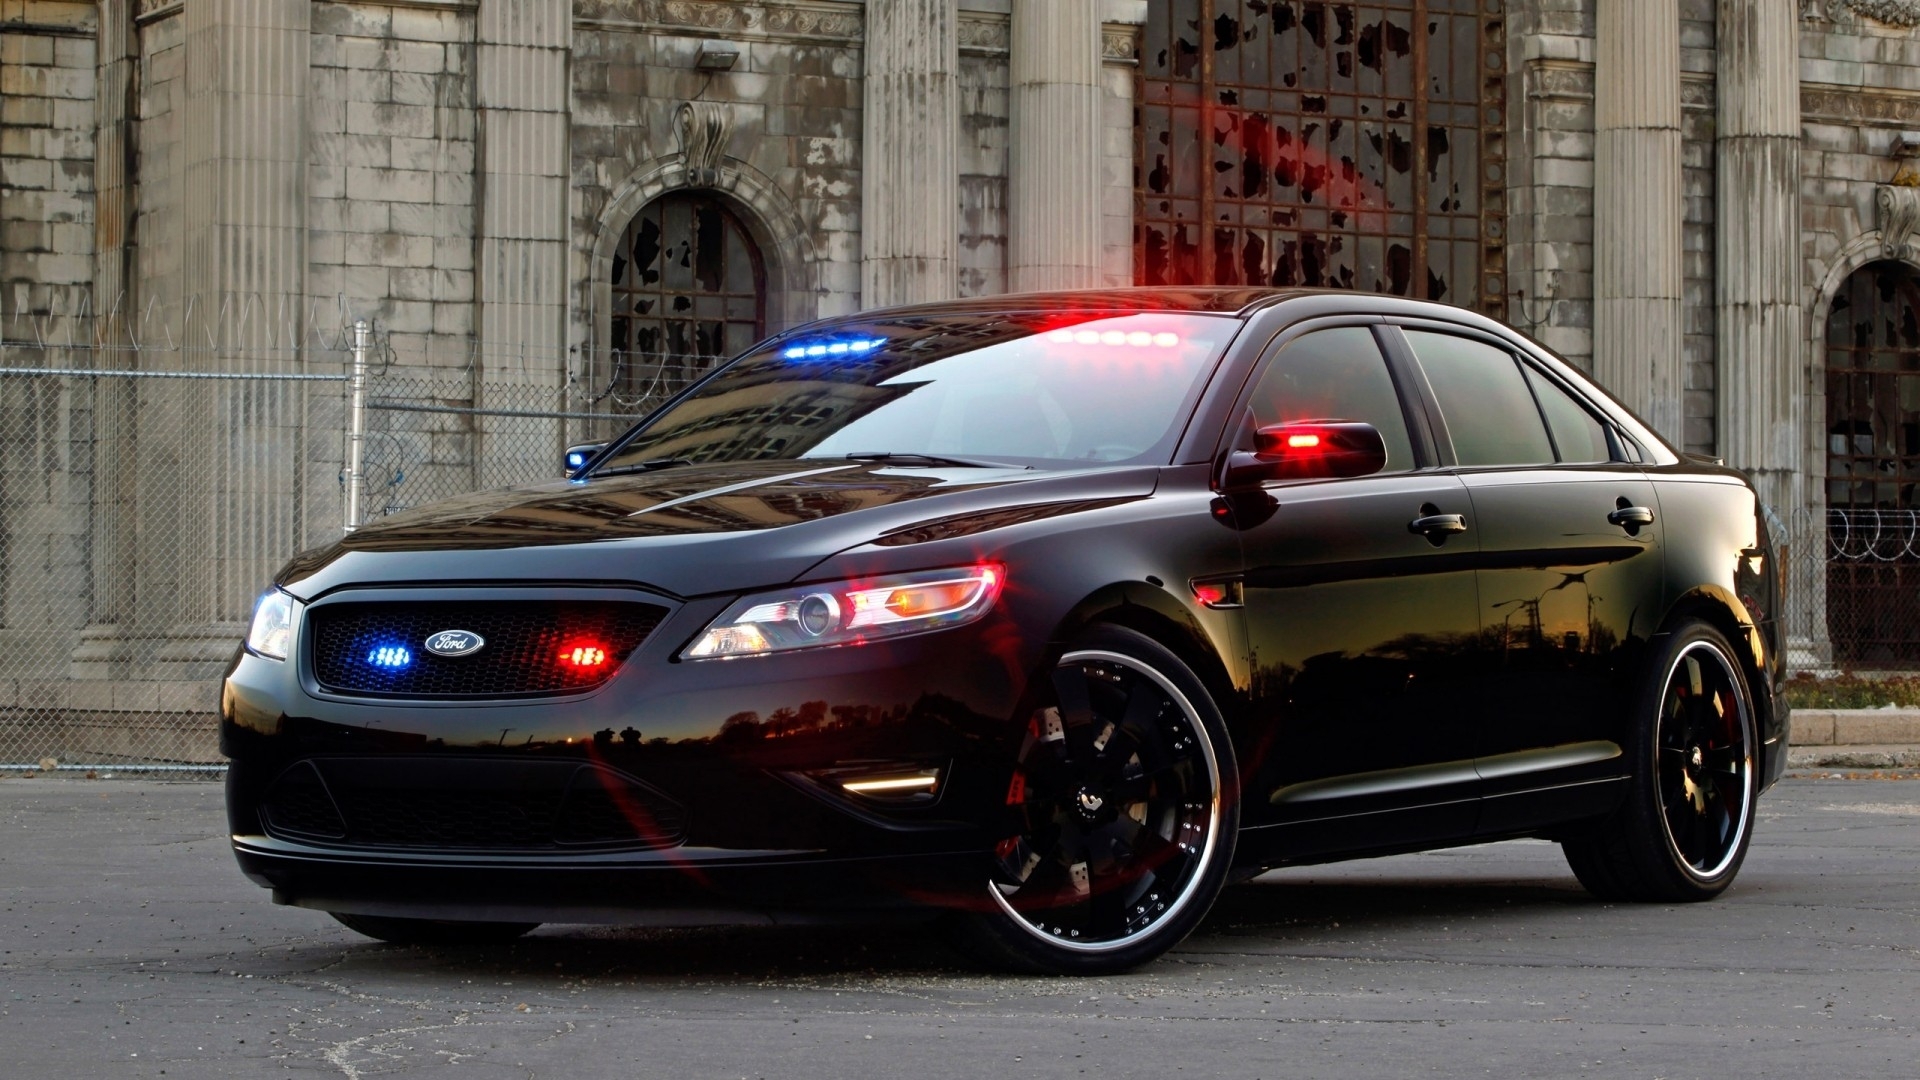 Stealth Ford Police Cars Police Interceptor Wallpaper - Michigan Central Station - HD Wallpaper 